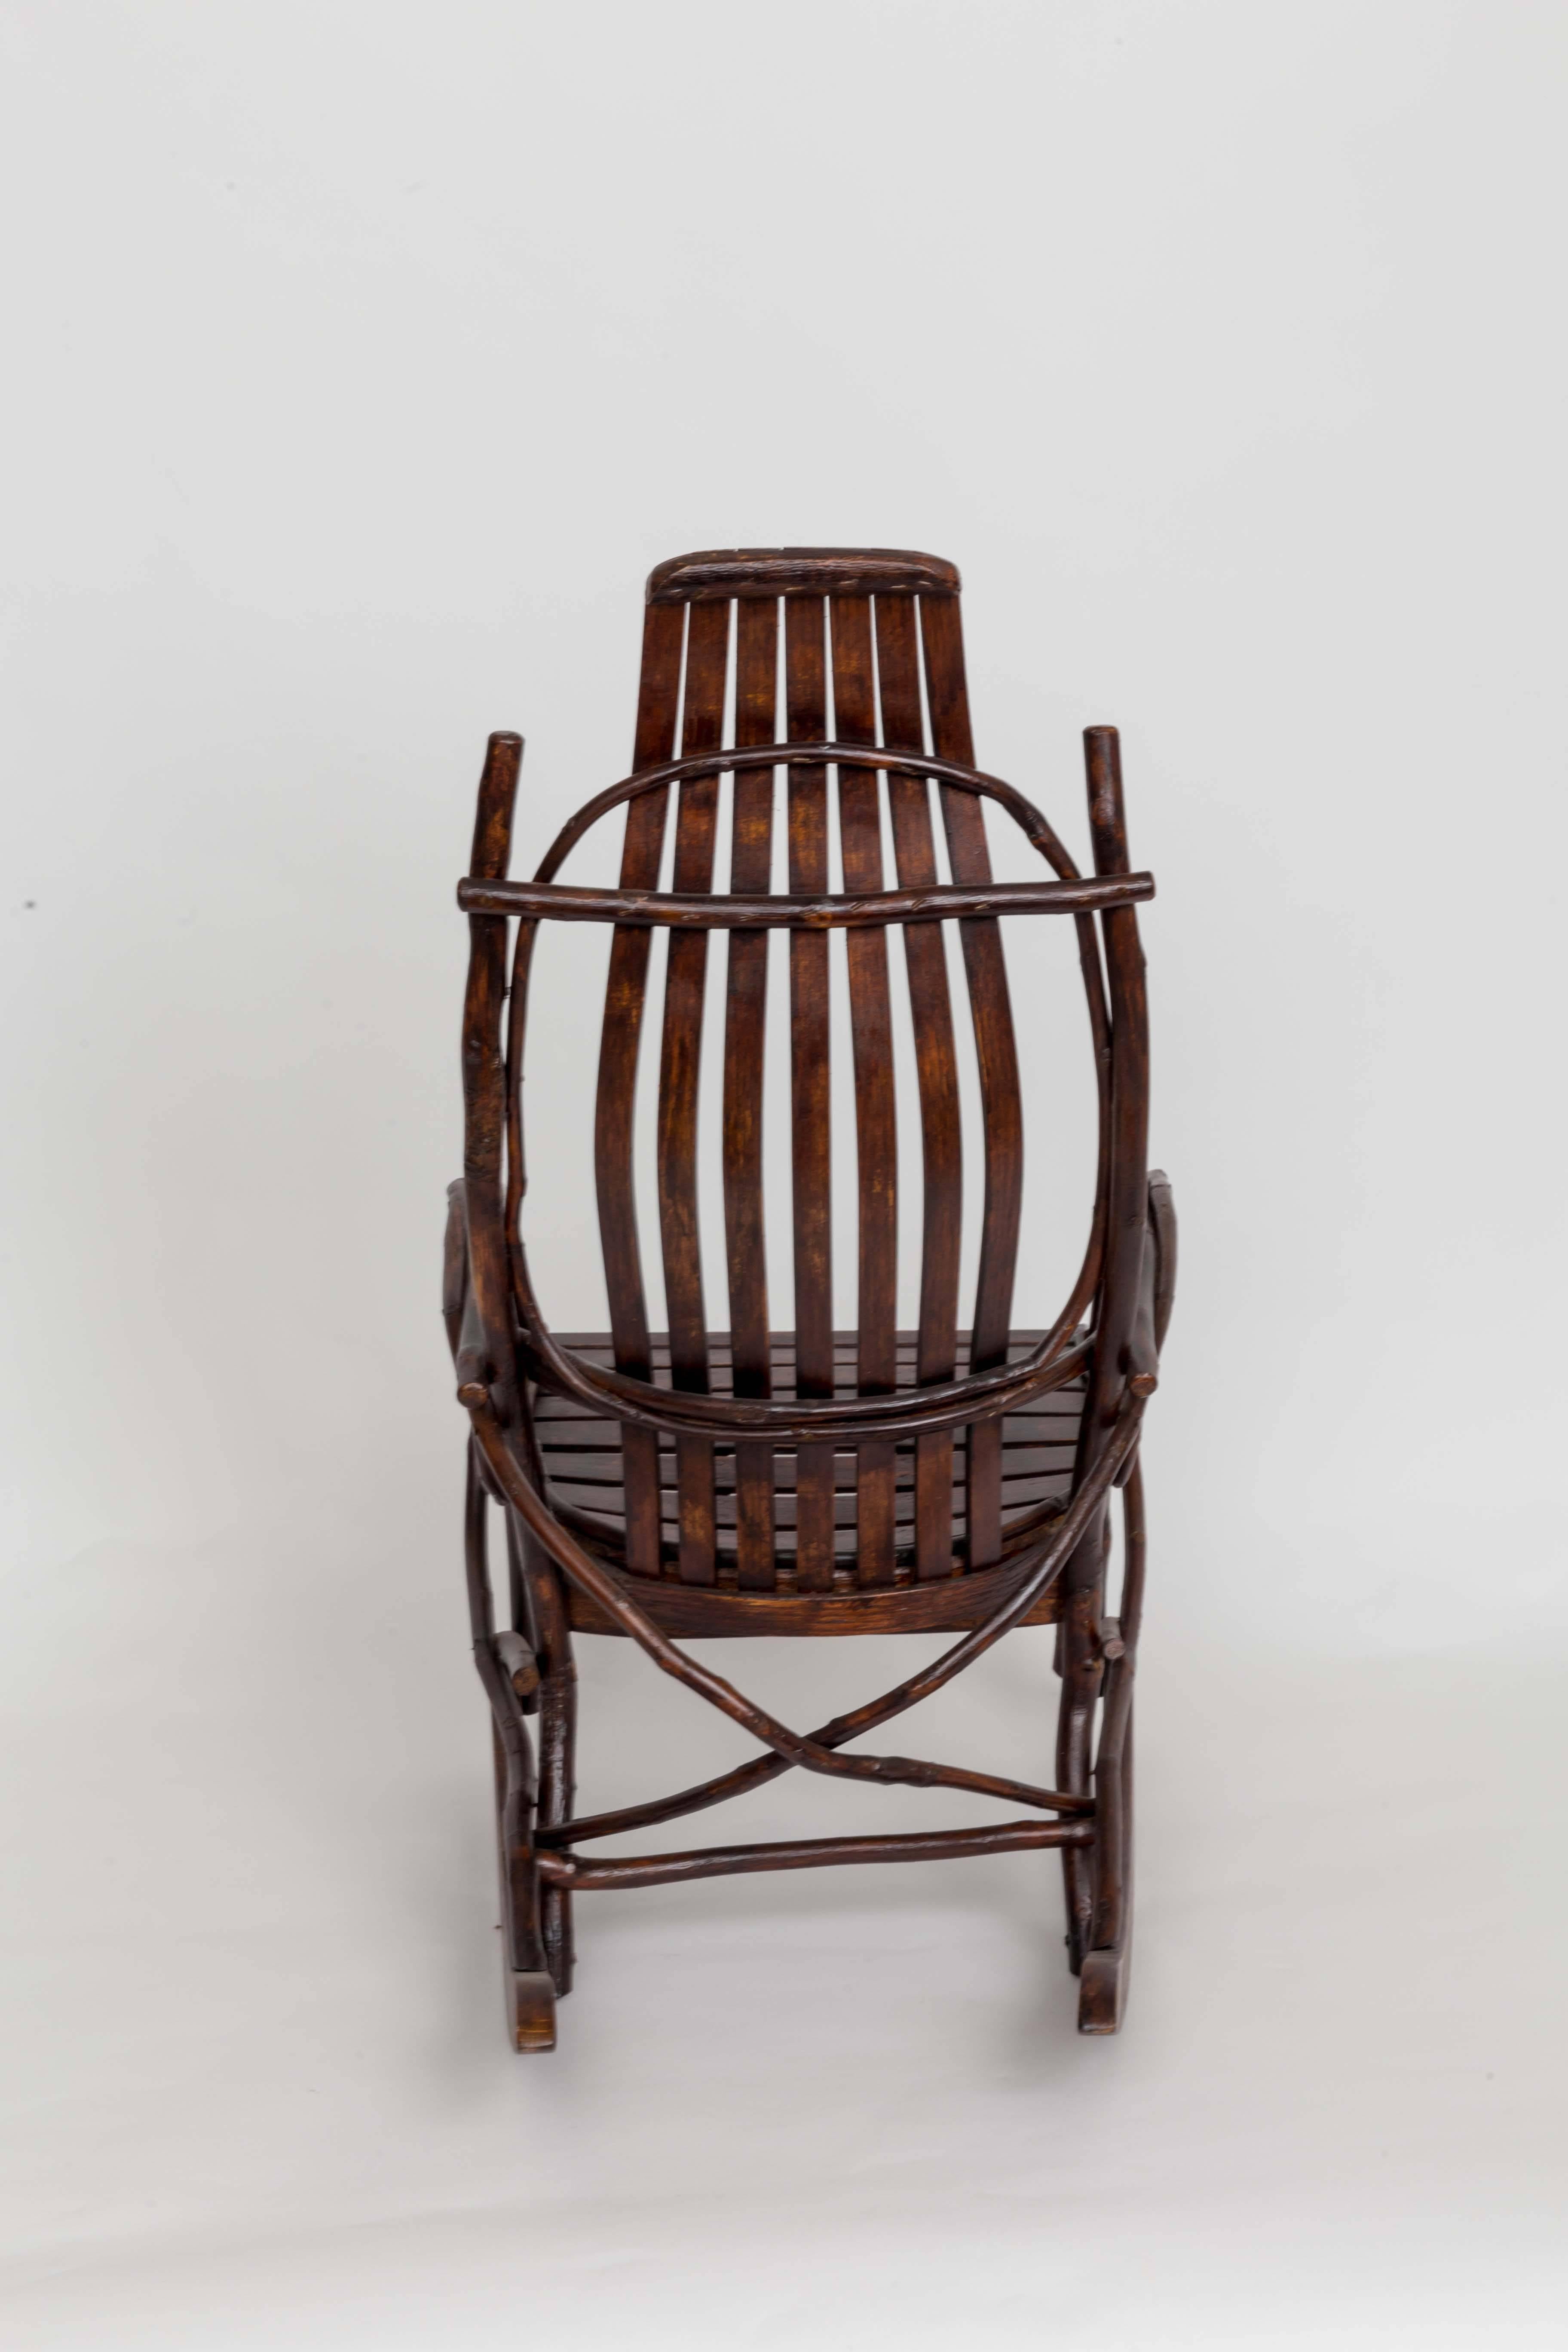 Early 20th-Century Adirondack Childs Rocker For Sale 2